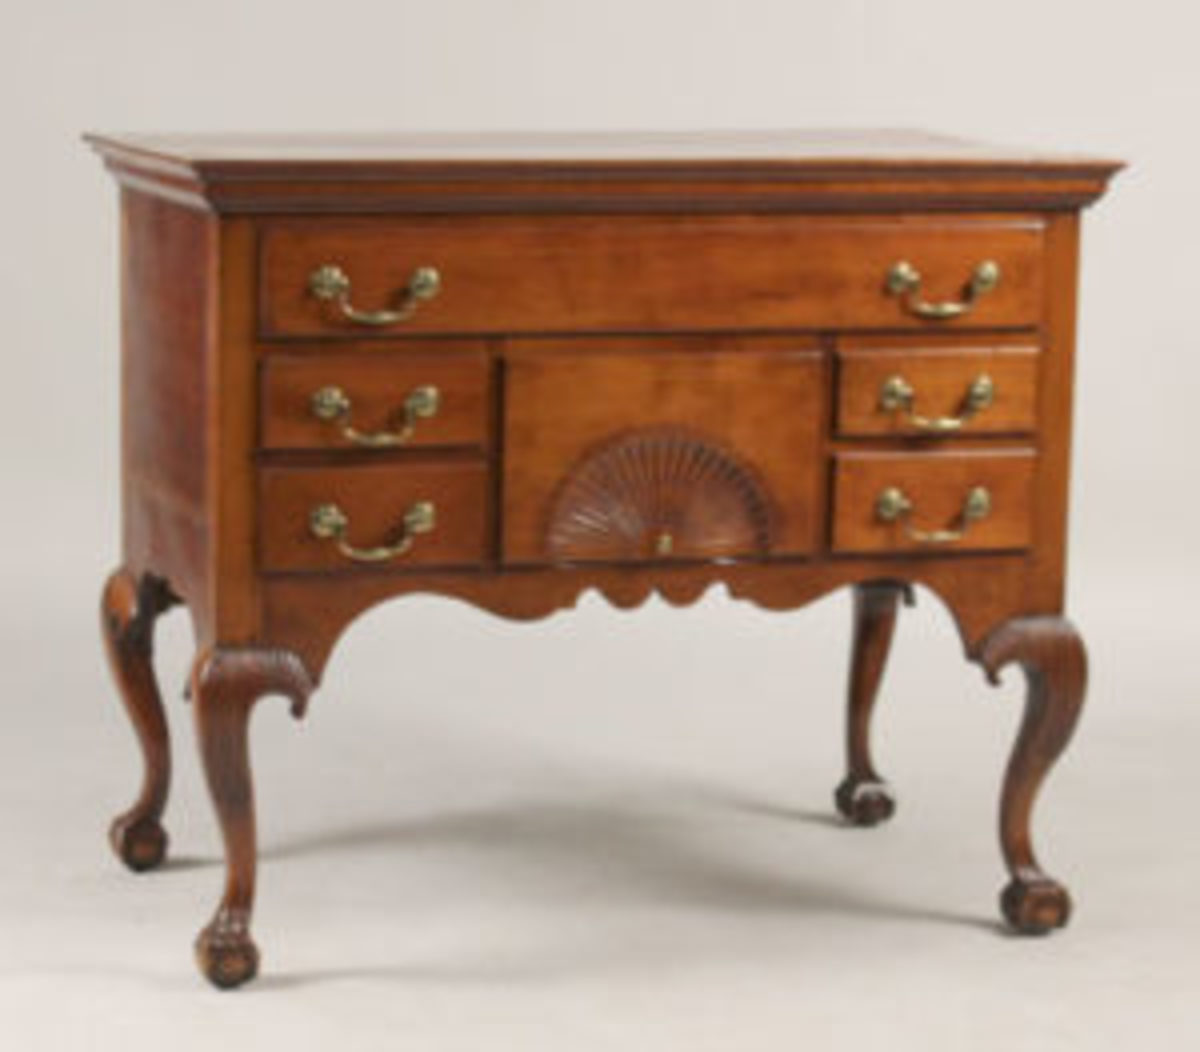 Chippendale cherrywood dressing table made in Colchester, Connecticut circa 1760-1775.